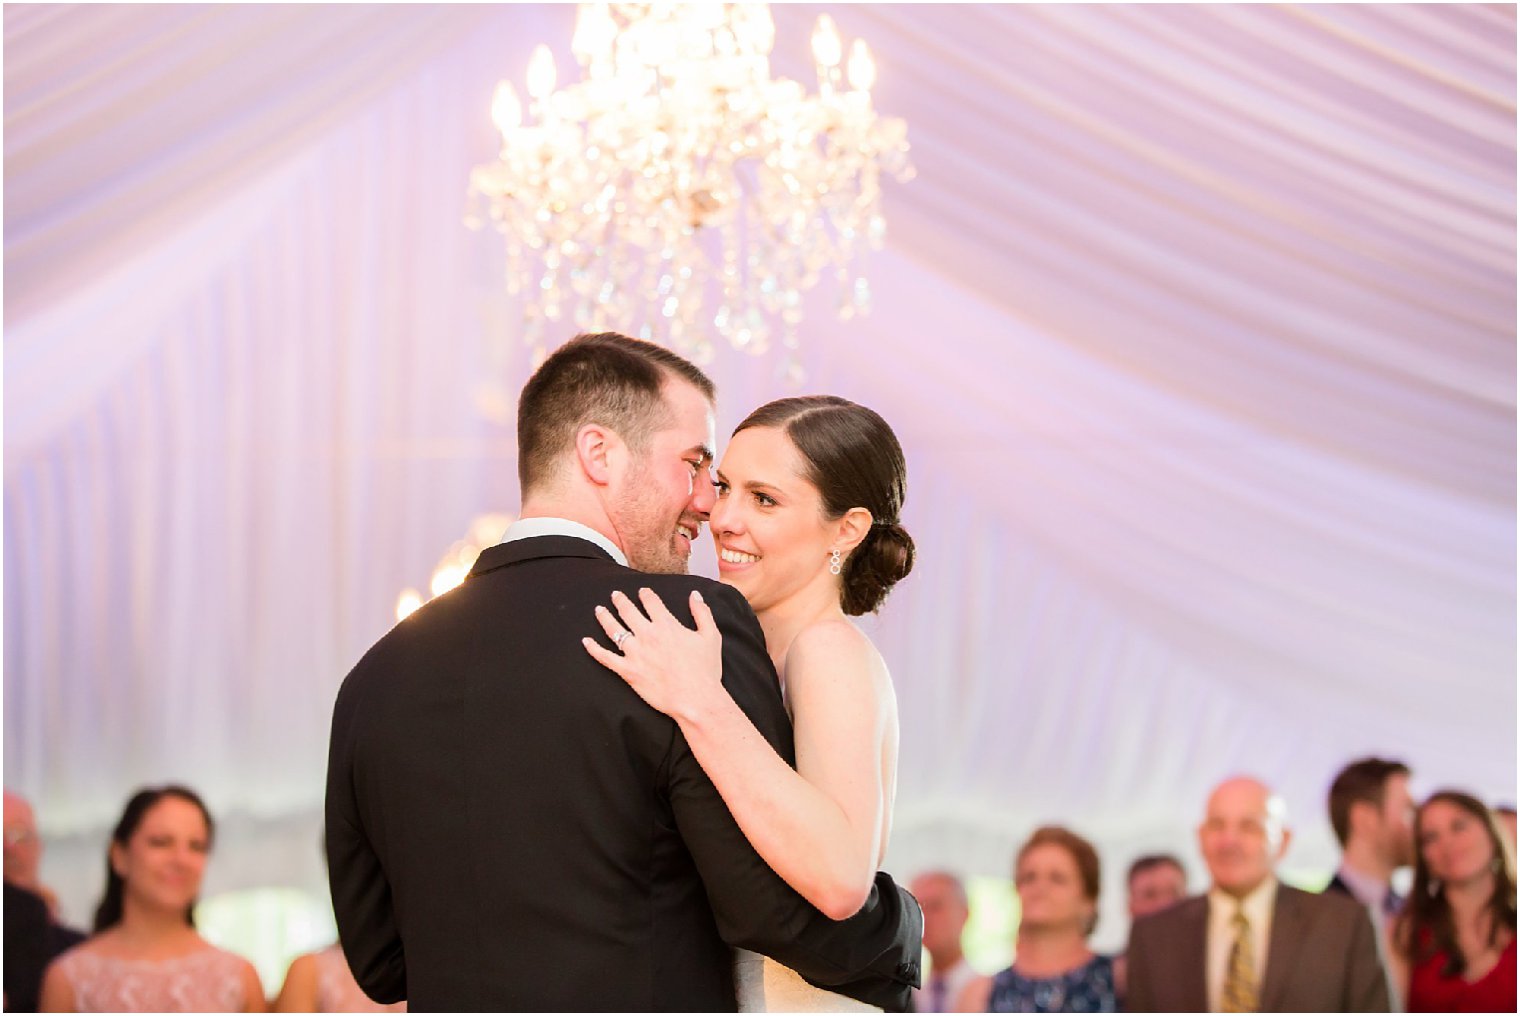 First dance photo at Windows on the Water at Frogbridge